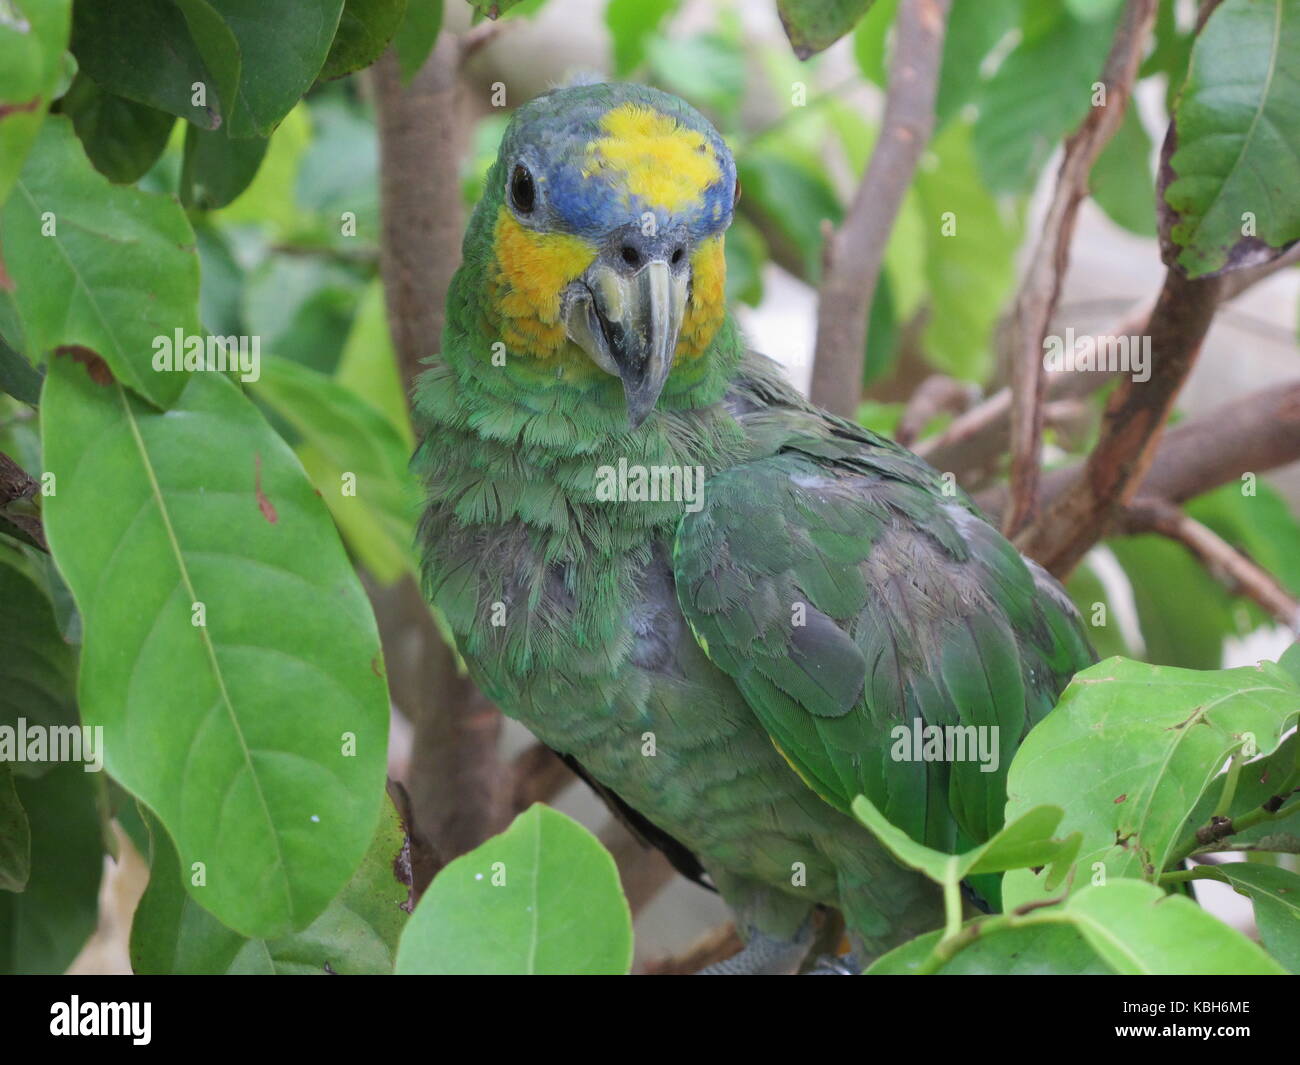 Yellow-crowned amazon parrot (Amazona ochrocephala) between leaves at the National Aviary of Colombia Stock Photo